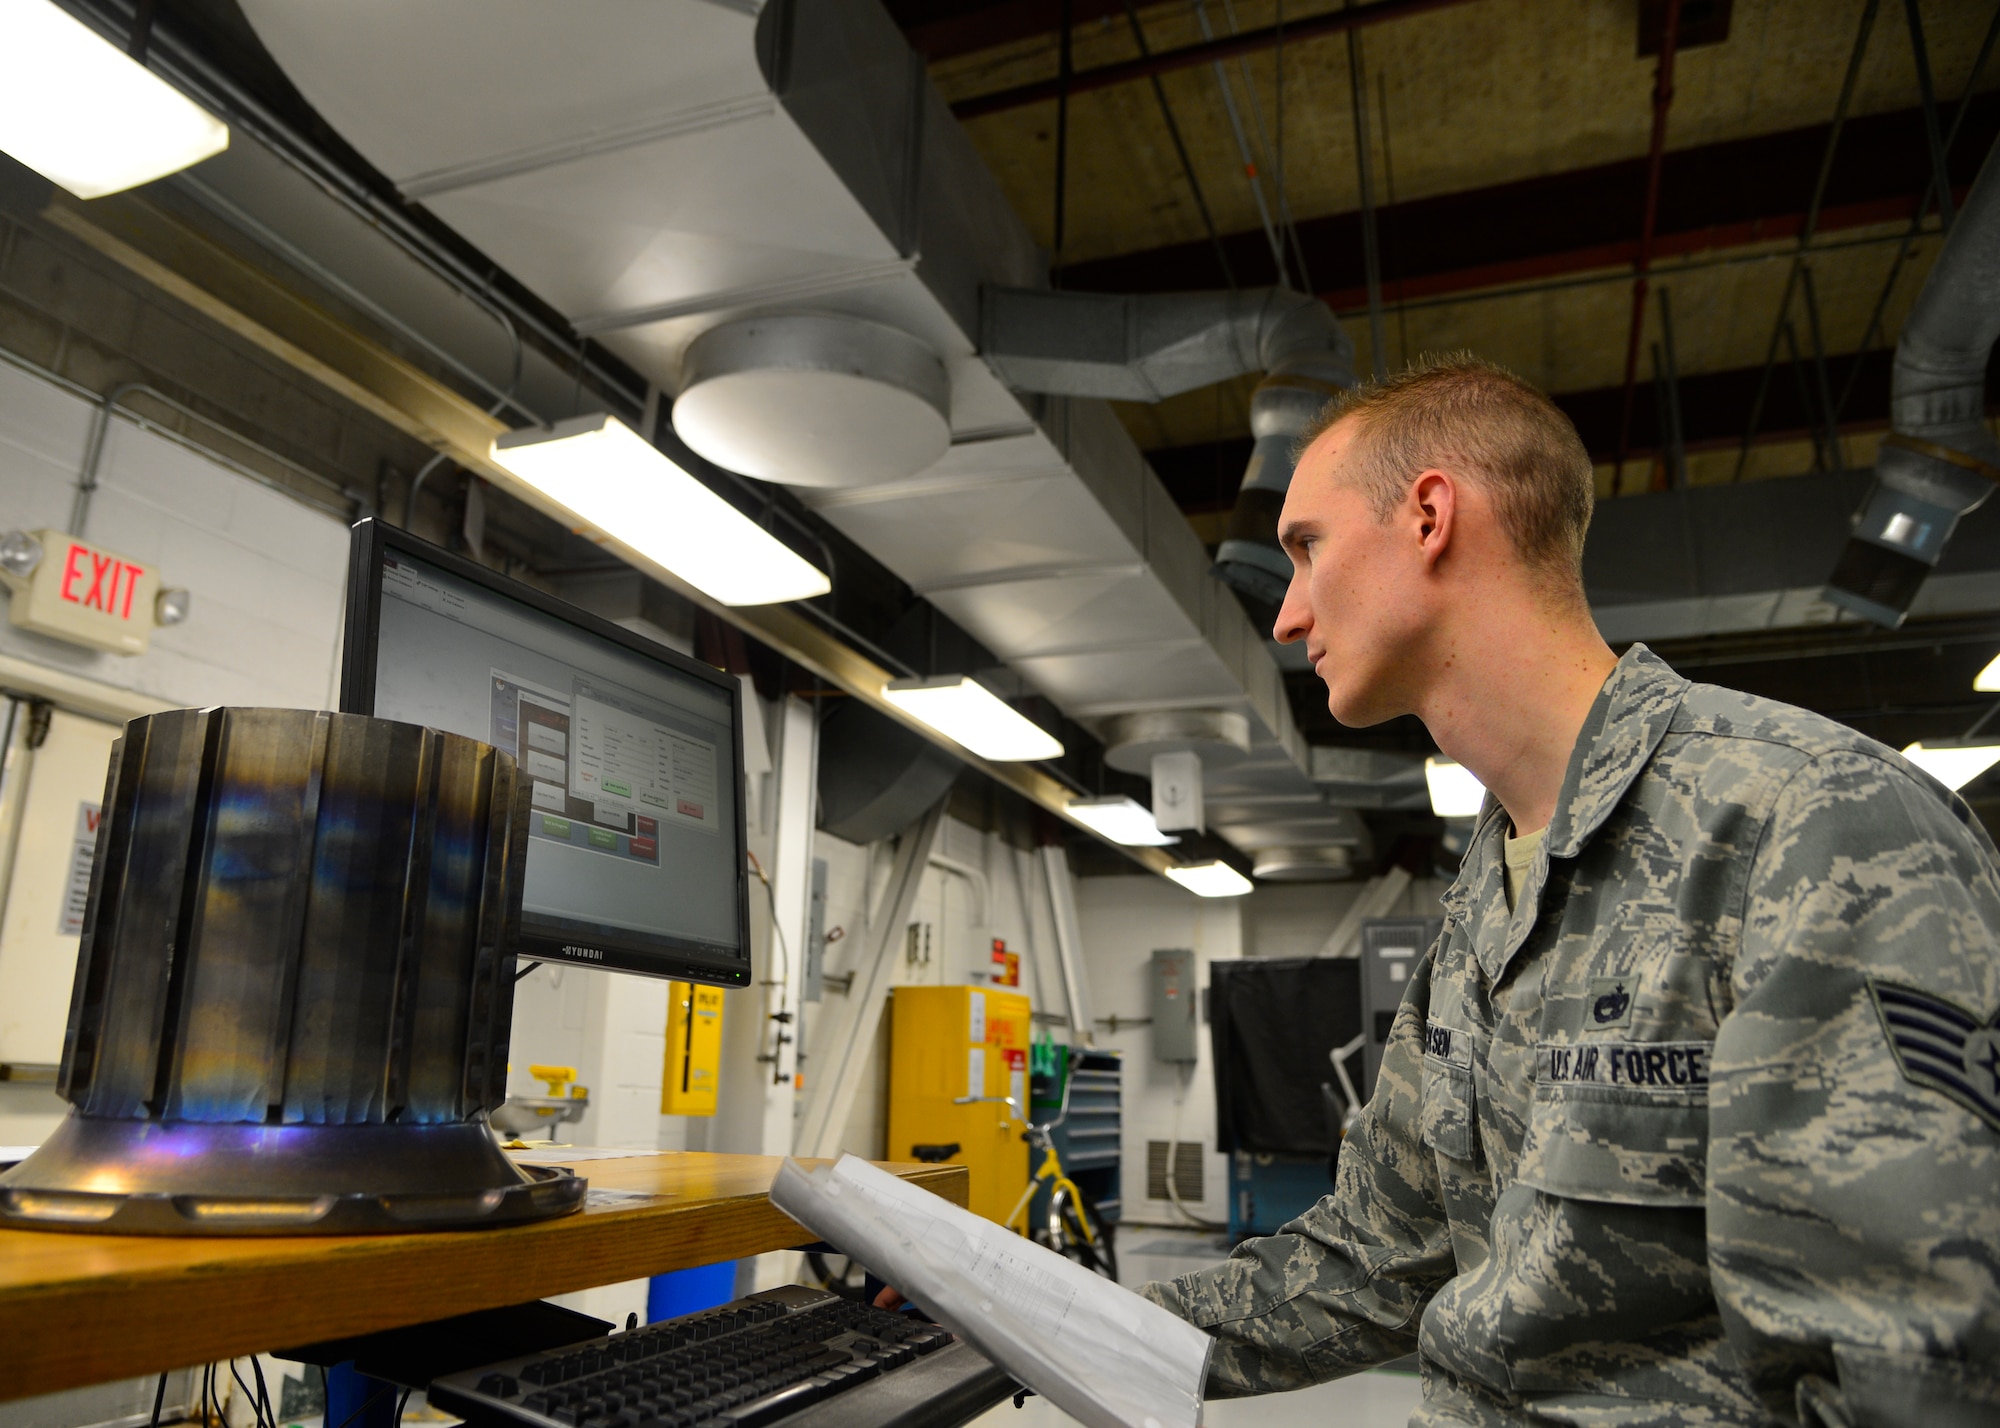 Staff Sgt. Chad Ericksen, 436th Maintenance Squadron Non-destructive Inspection craftsman, inputs data about a torque tube into the Parts, Inspection, Turnover (PIT) log March 12, 2015, at Dover Air Force Base, Del. Ericksen created the PIT program in 2012 to transition from log books to a more modern format with better report accuracy. (U.S. Air Force photo/Airman 1st Class William Johnson)